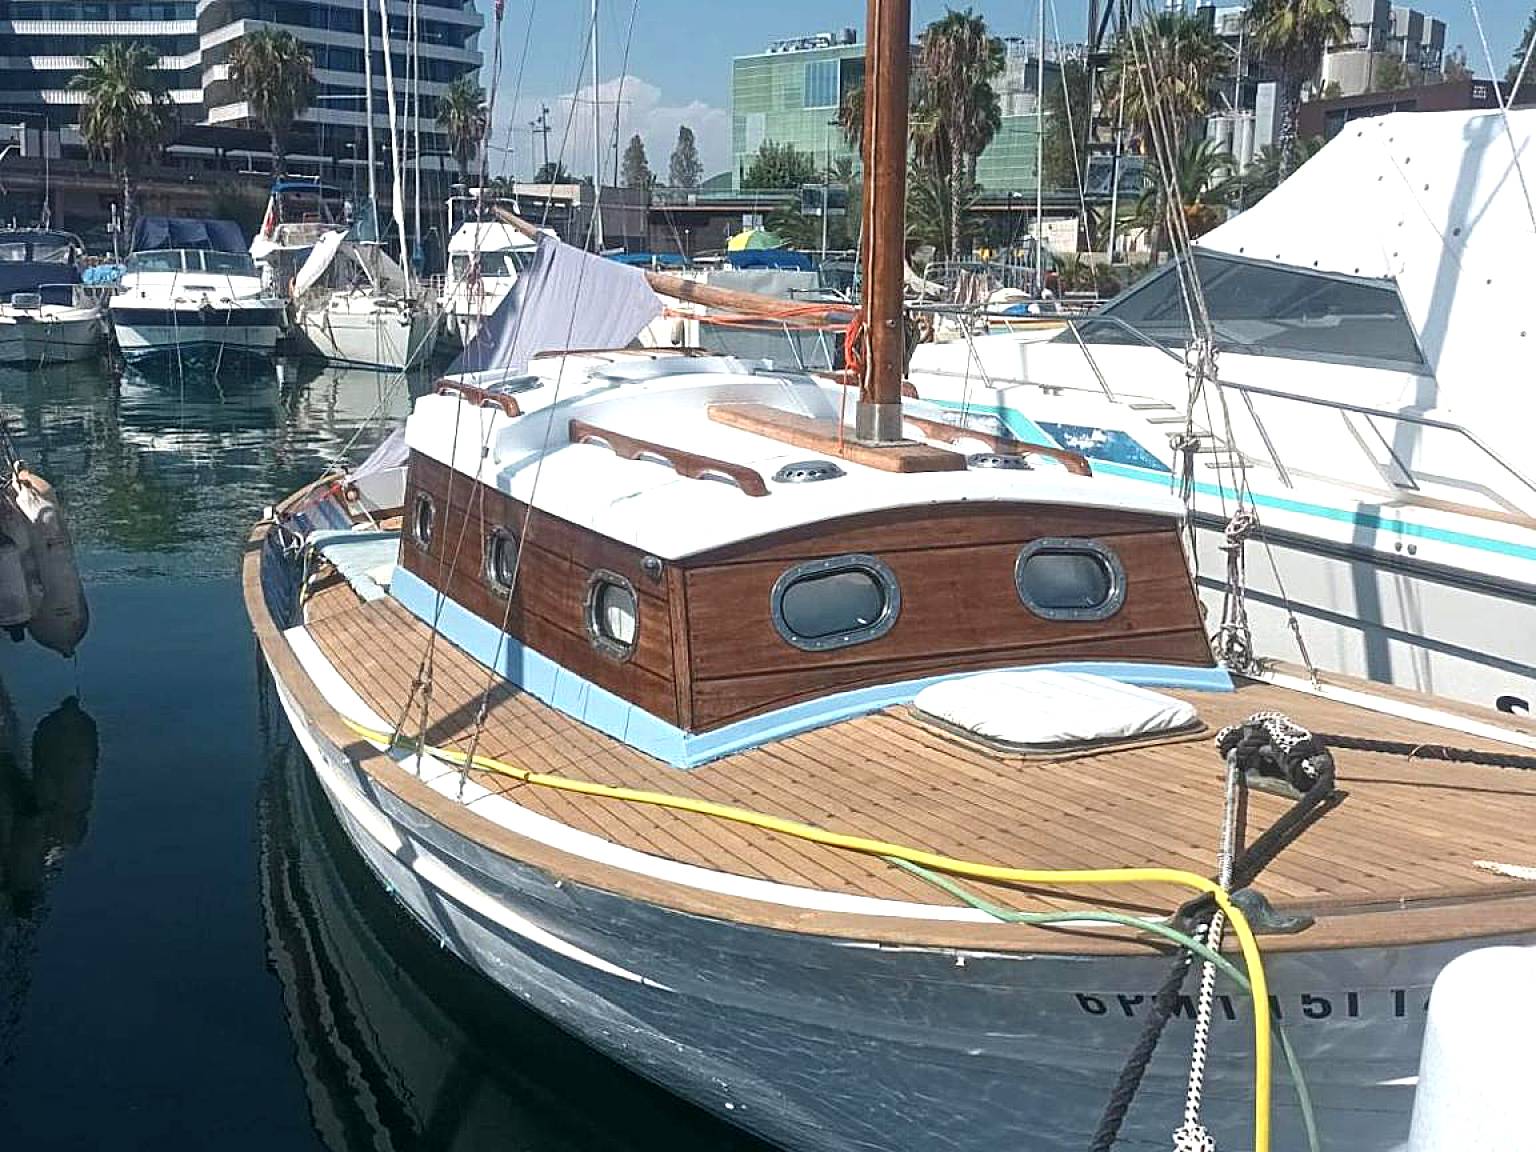 Lovely wooden boat in Port forum, with AC and two bikes.